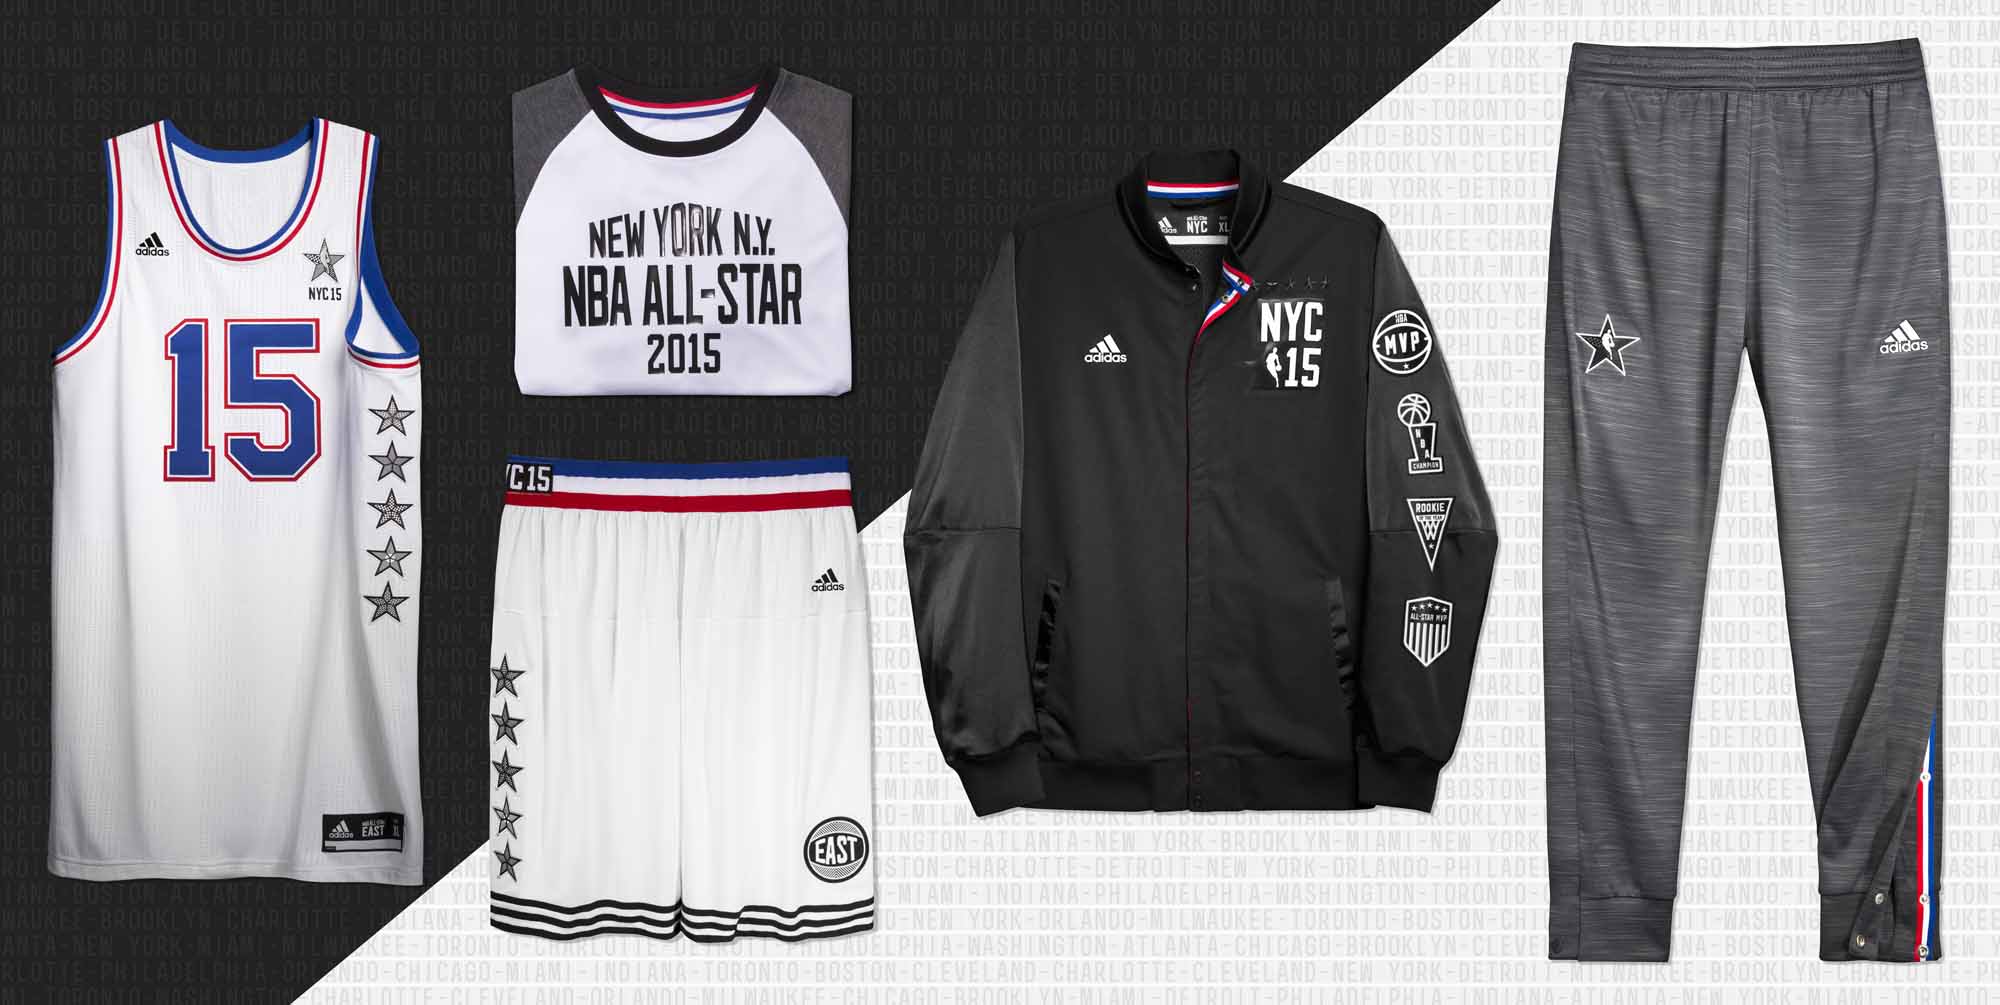 adidas NBA All-Star Collection Lay Down East, H